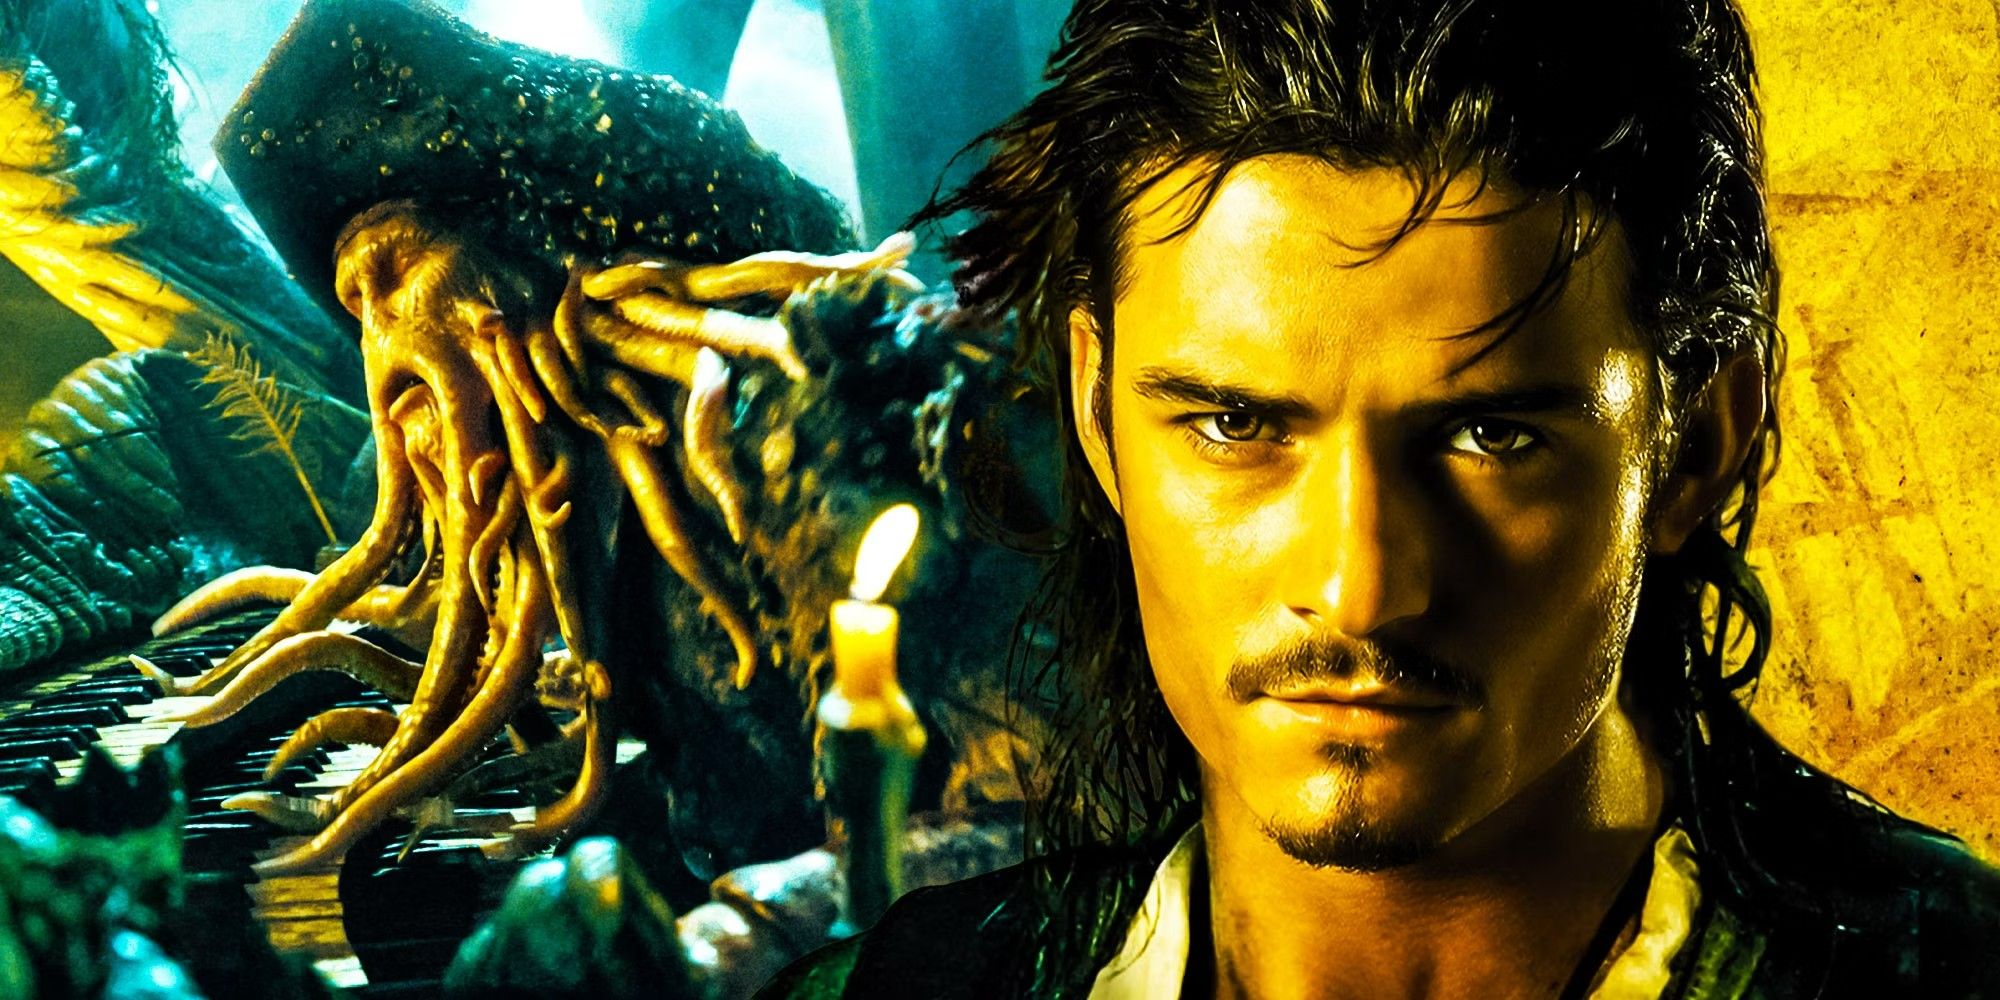 Davy Jones and Will Turner in Pirates of the Caribbean